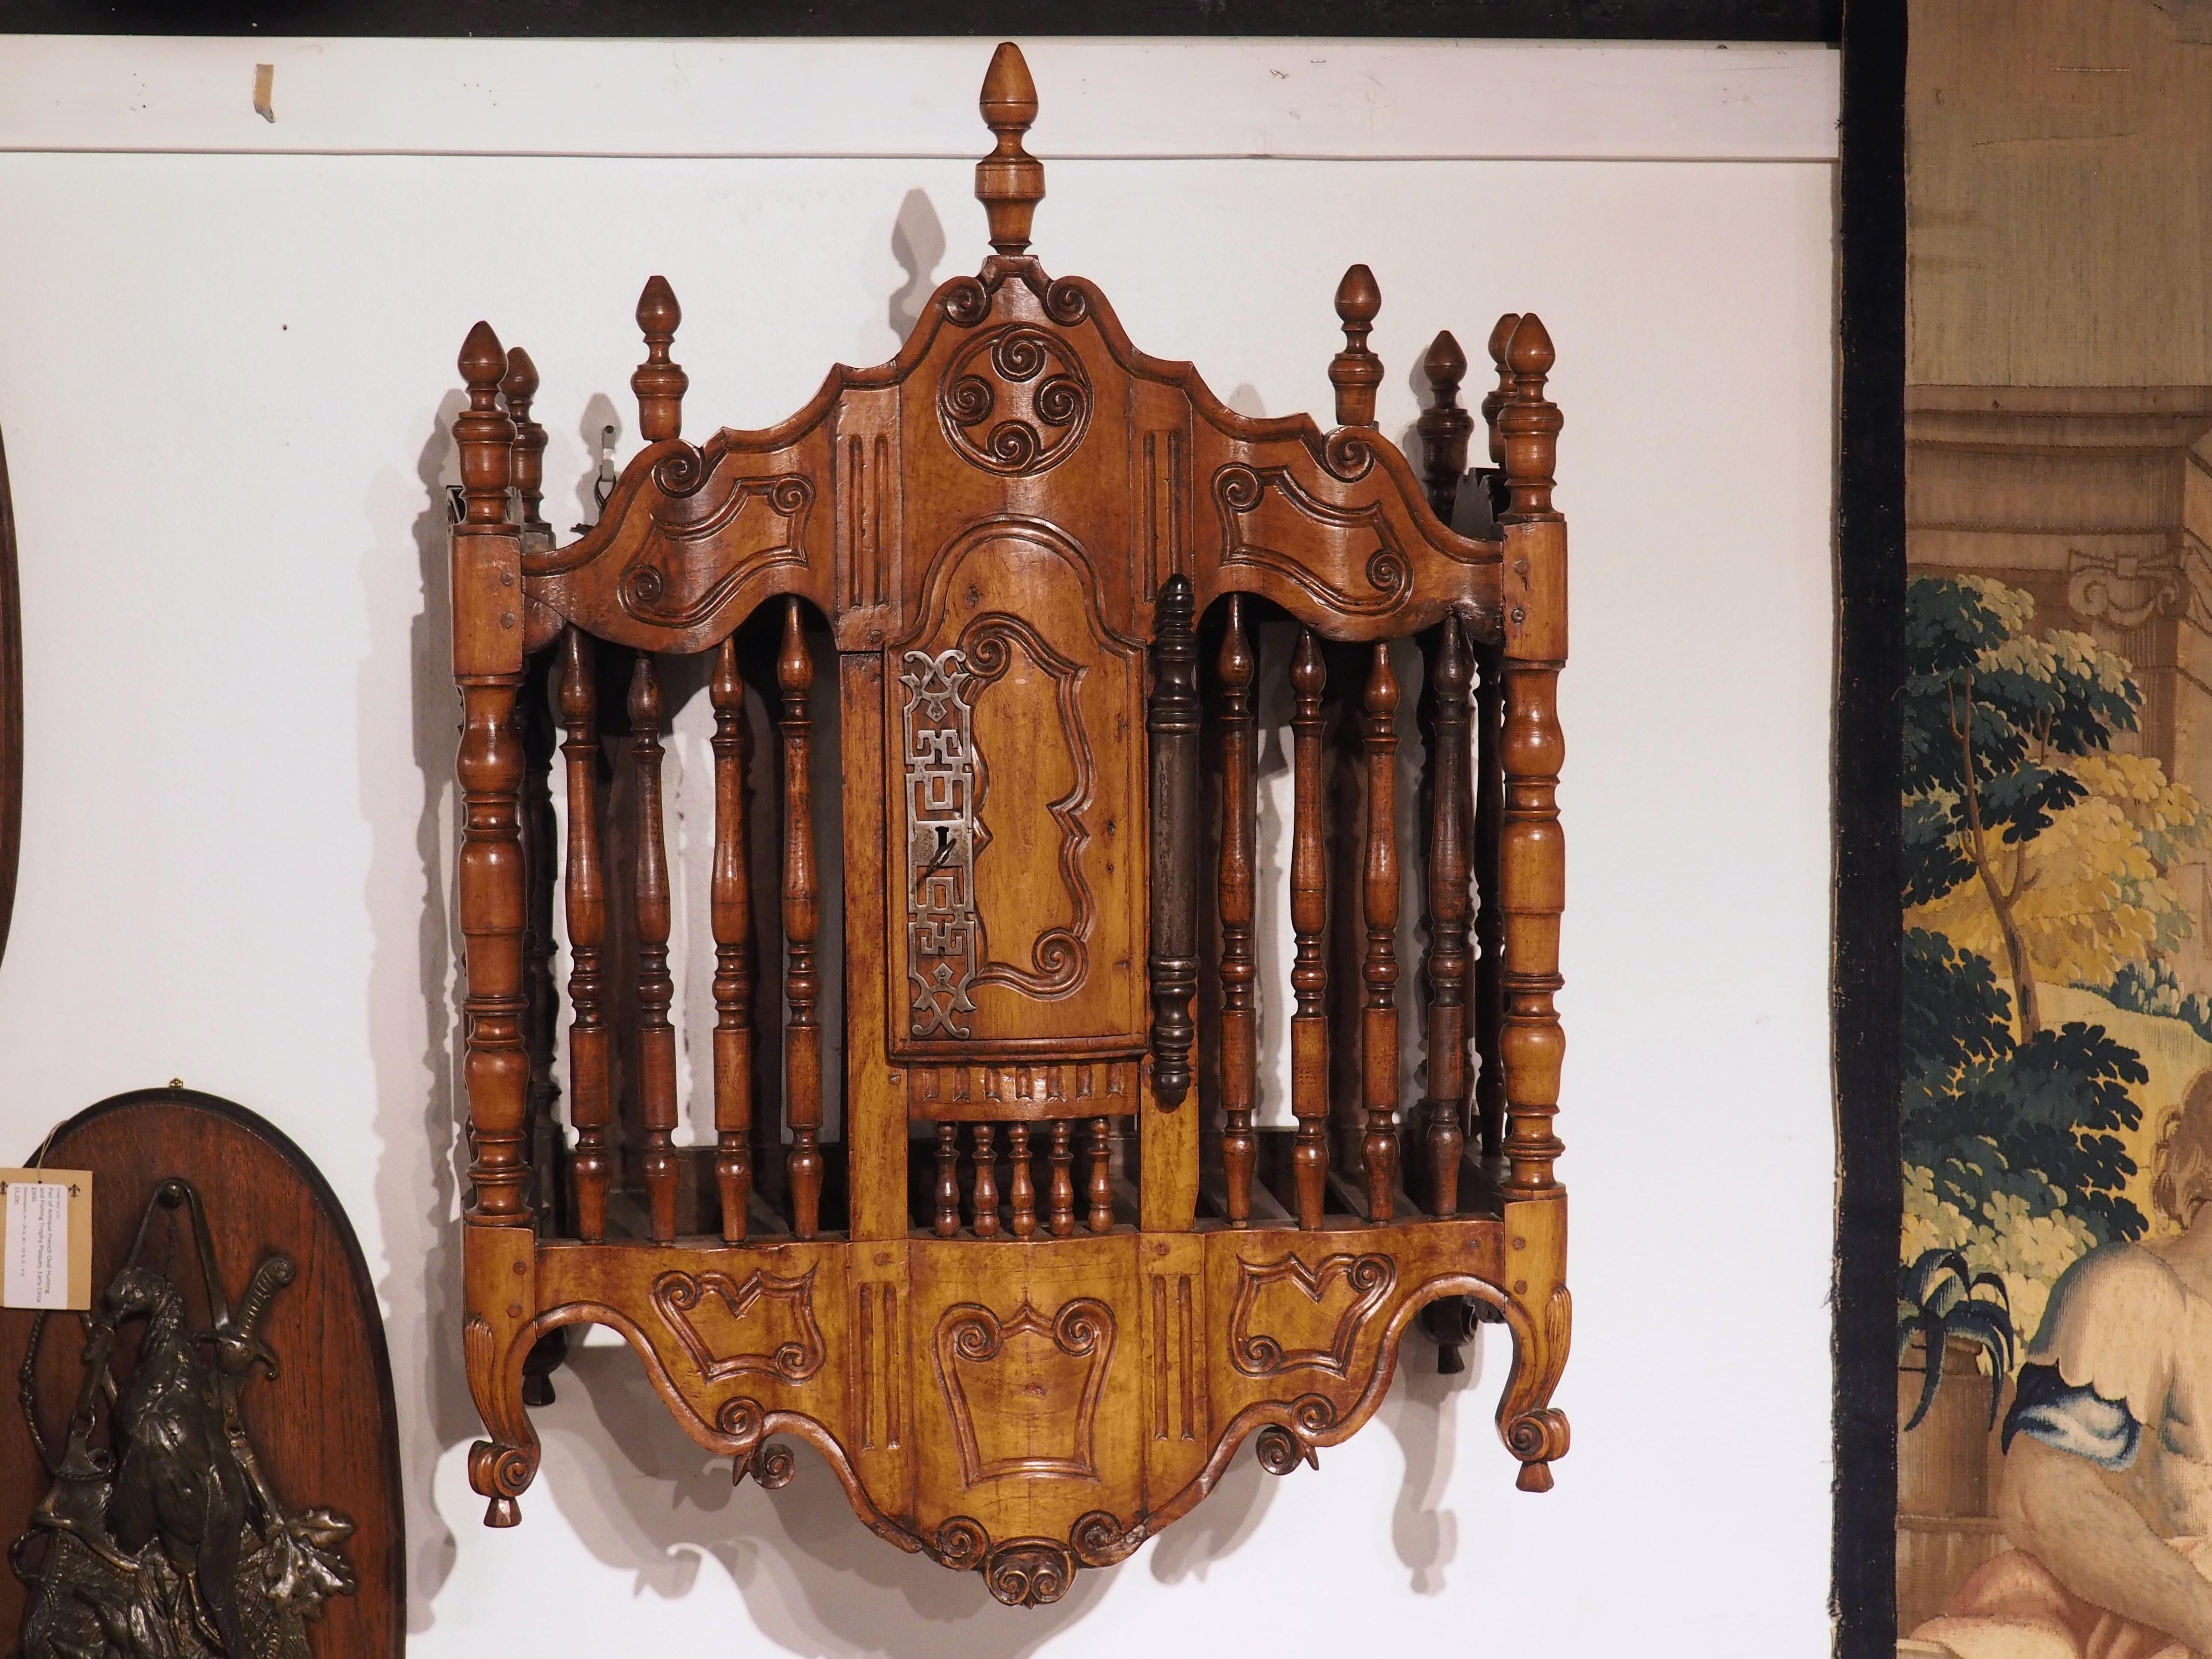 Arguably one of the most recognizable pieces of furniture to emerge from the historical French province of Provence, this panetiere “bread safe” was hand-carved in walnut in Fourques, circa 1760. The turned baluster forms that comprise most of the